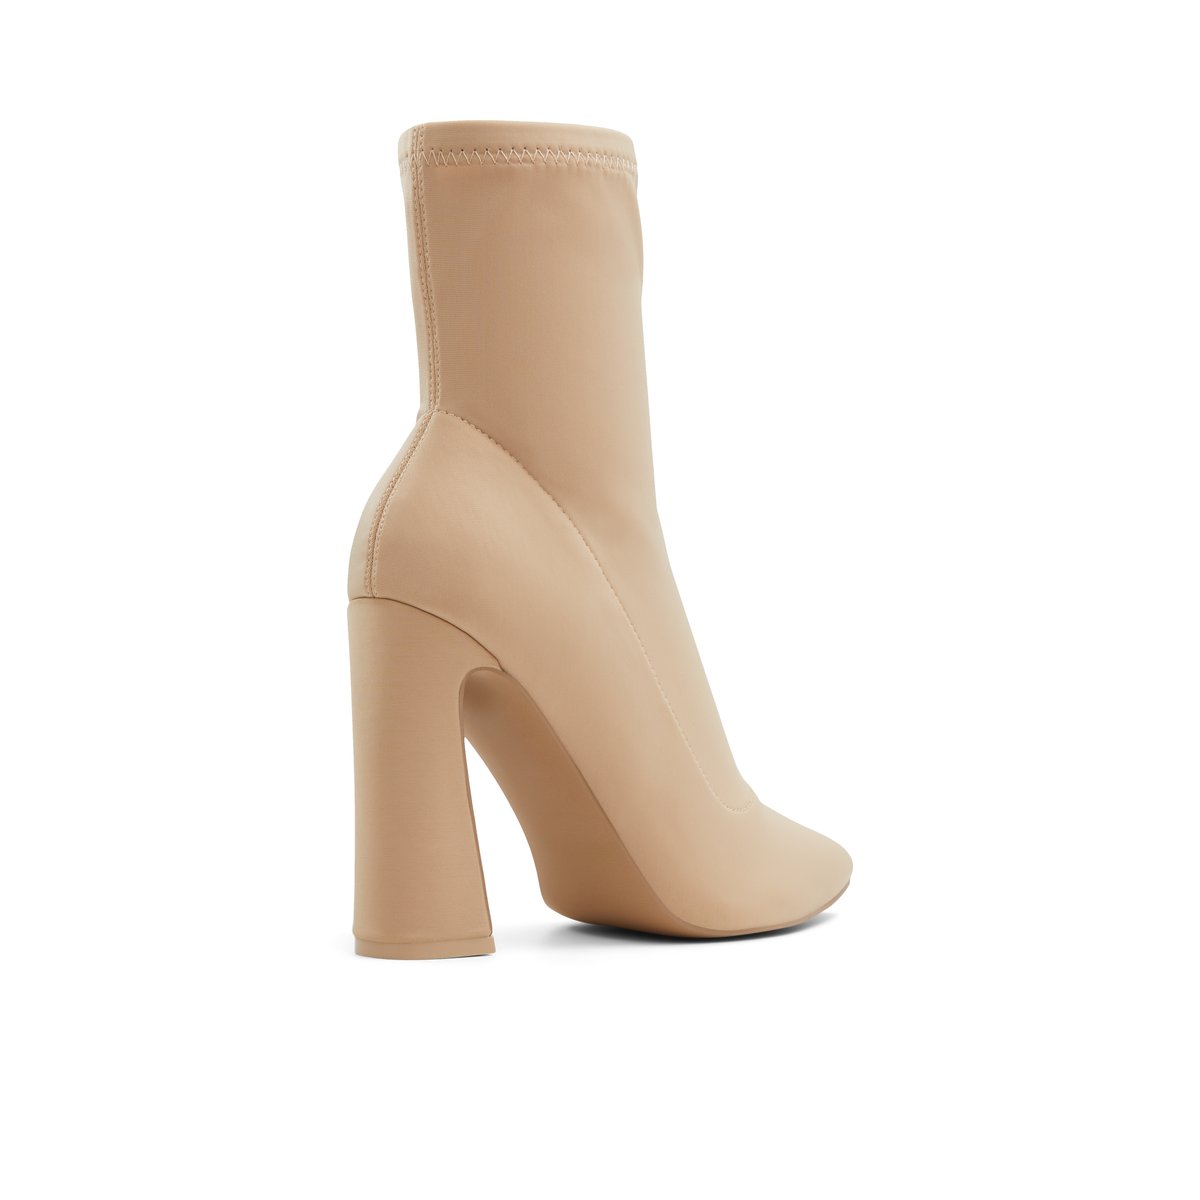 Beige two tone square toe heeled ankle boots | River Island